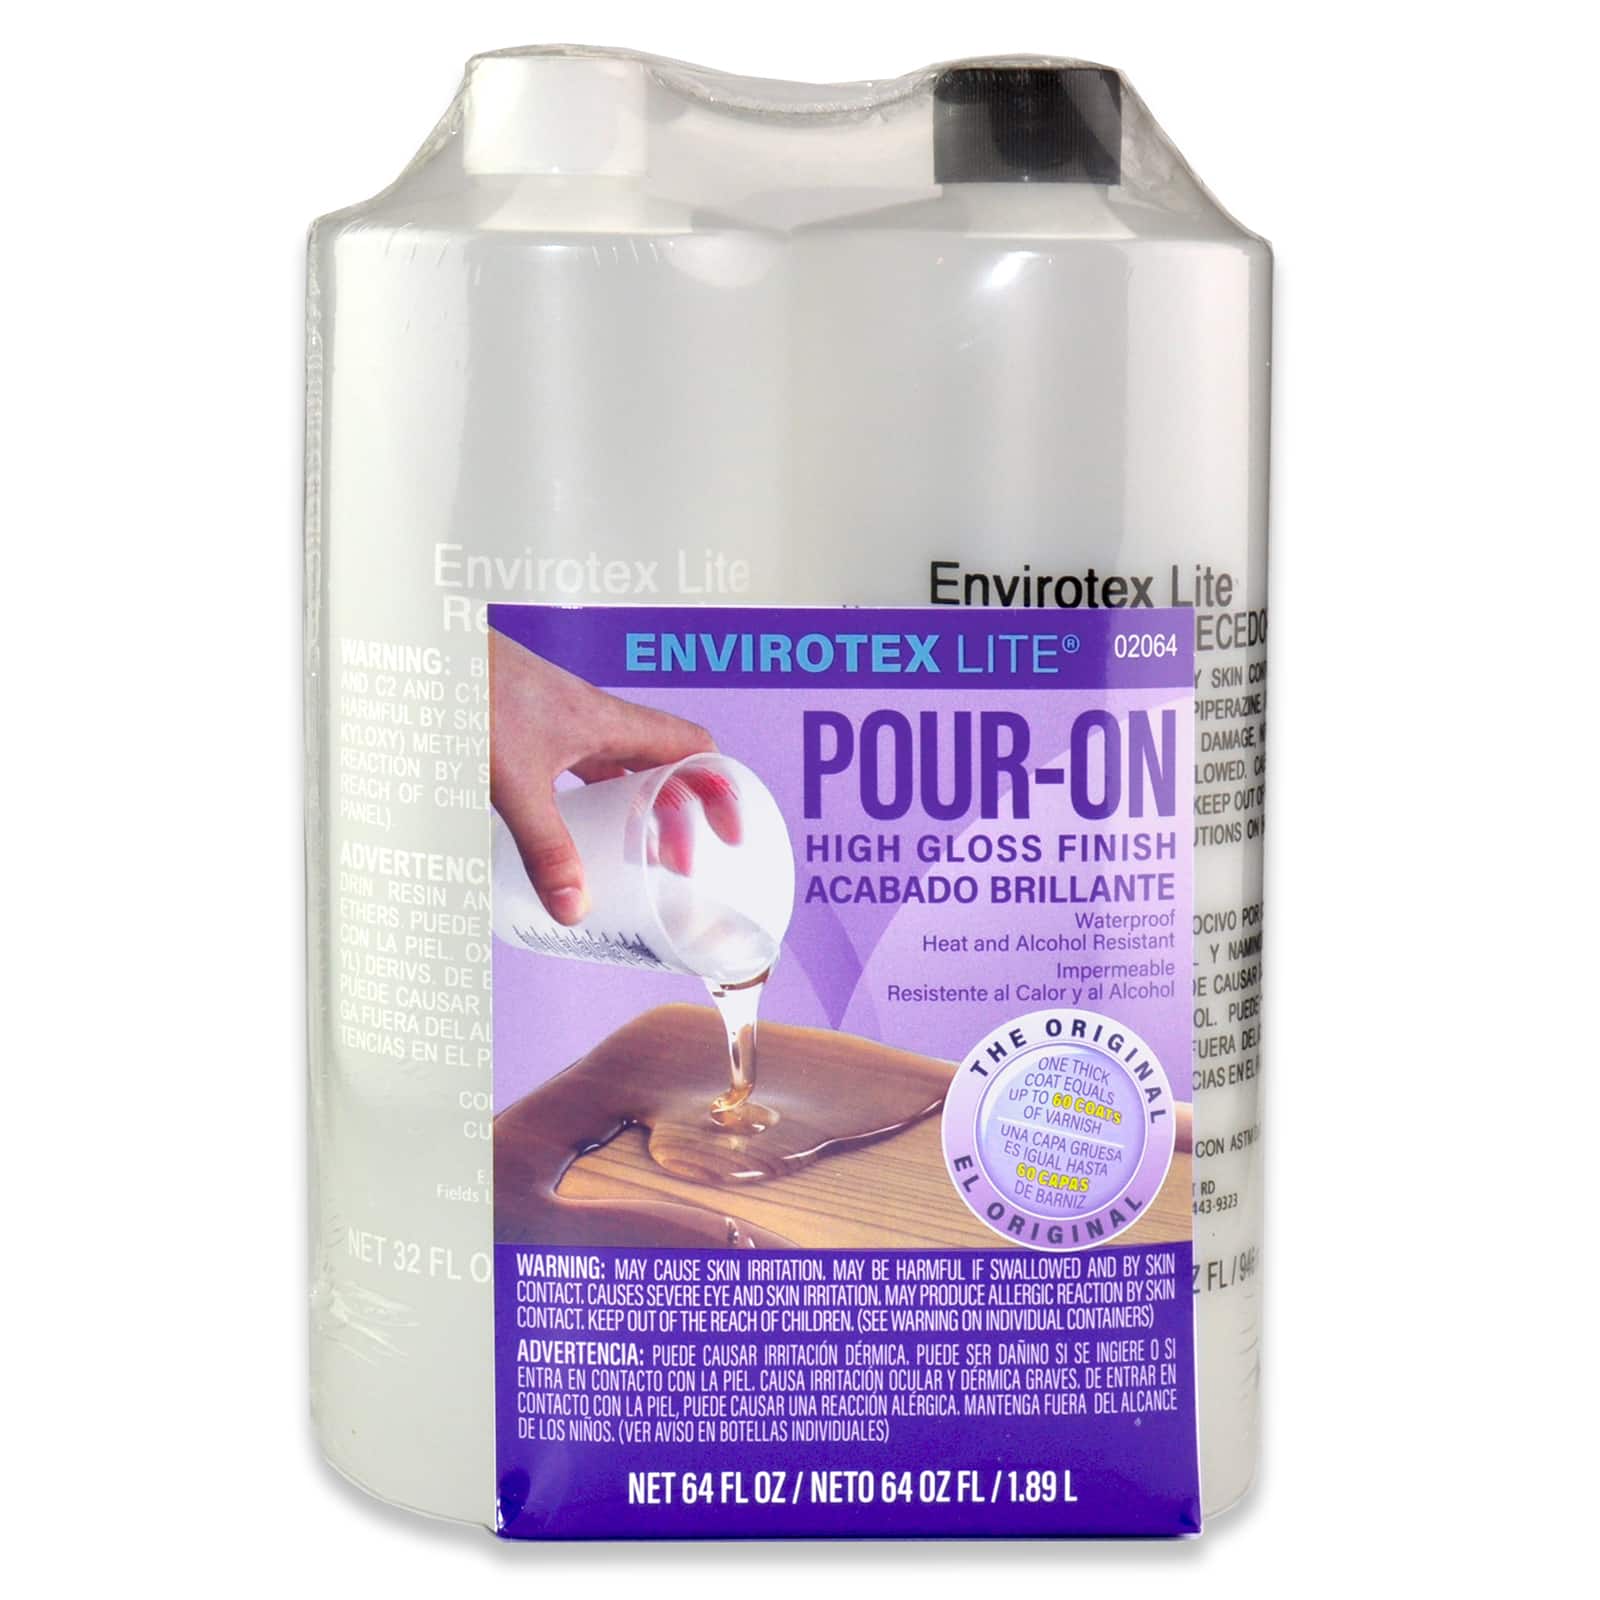  Environmental Technology EnviroTex Lite Pour-On High Gloss  Finish [4 oz Kit] Crystal Clear Epoxy Coating for Tabletops / Countertops